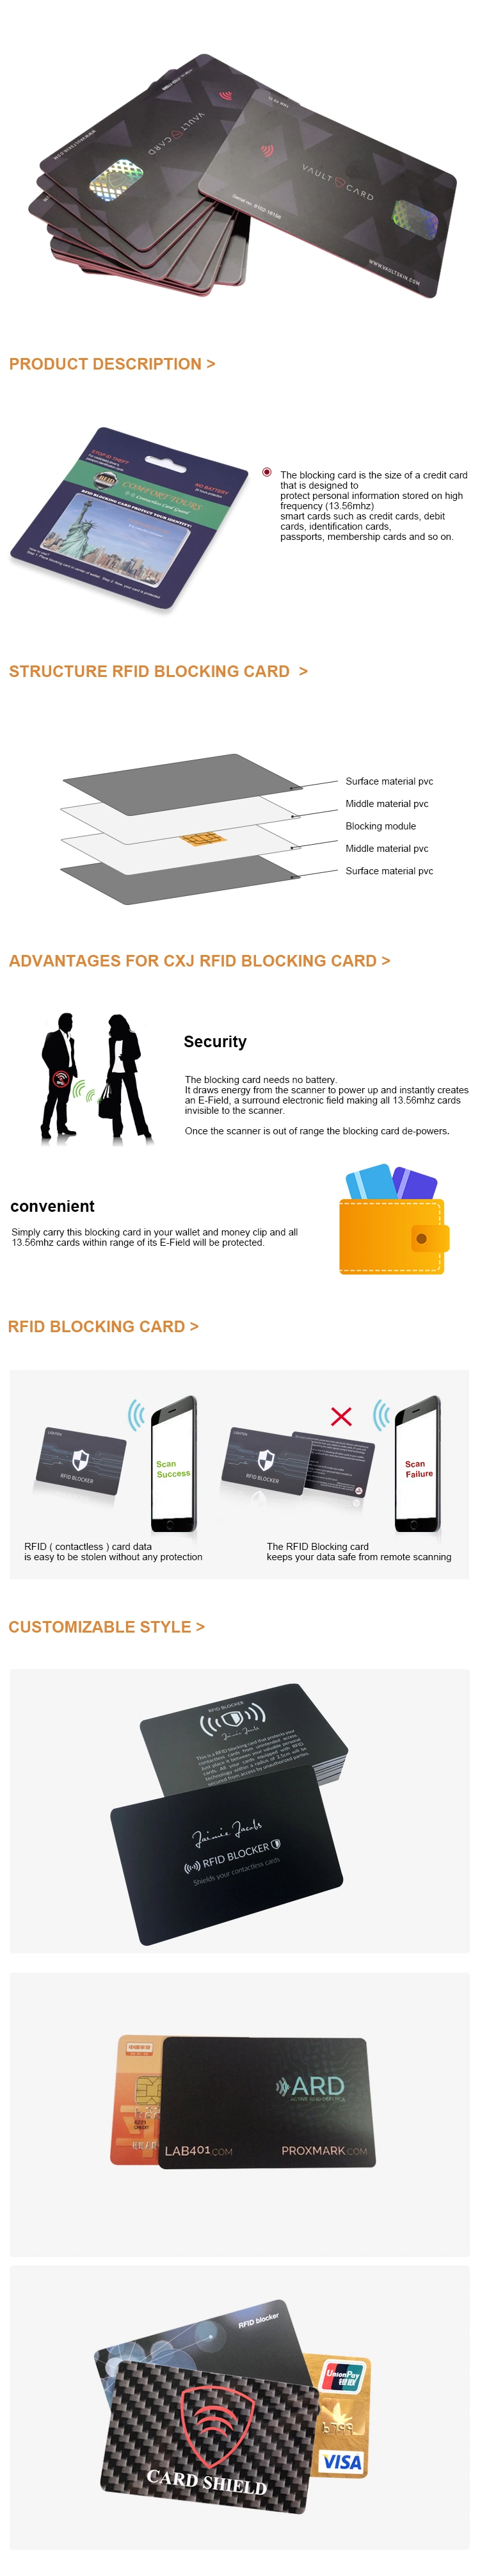 Credit Card Protector RFID Blocking Card to Block RFID / NFC Signals From Credit Cards and Passports